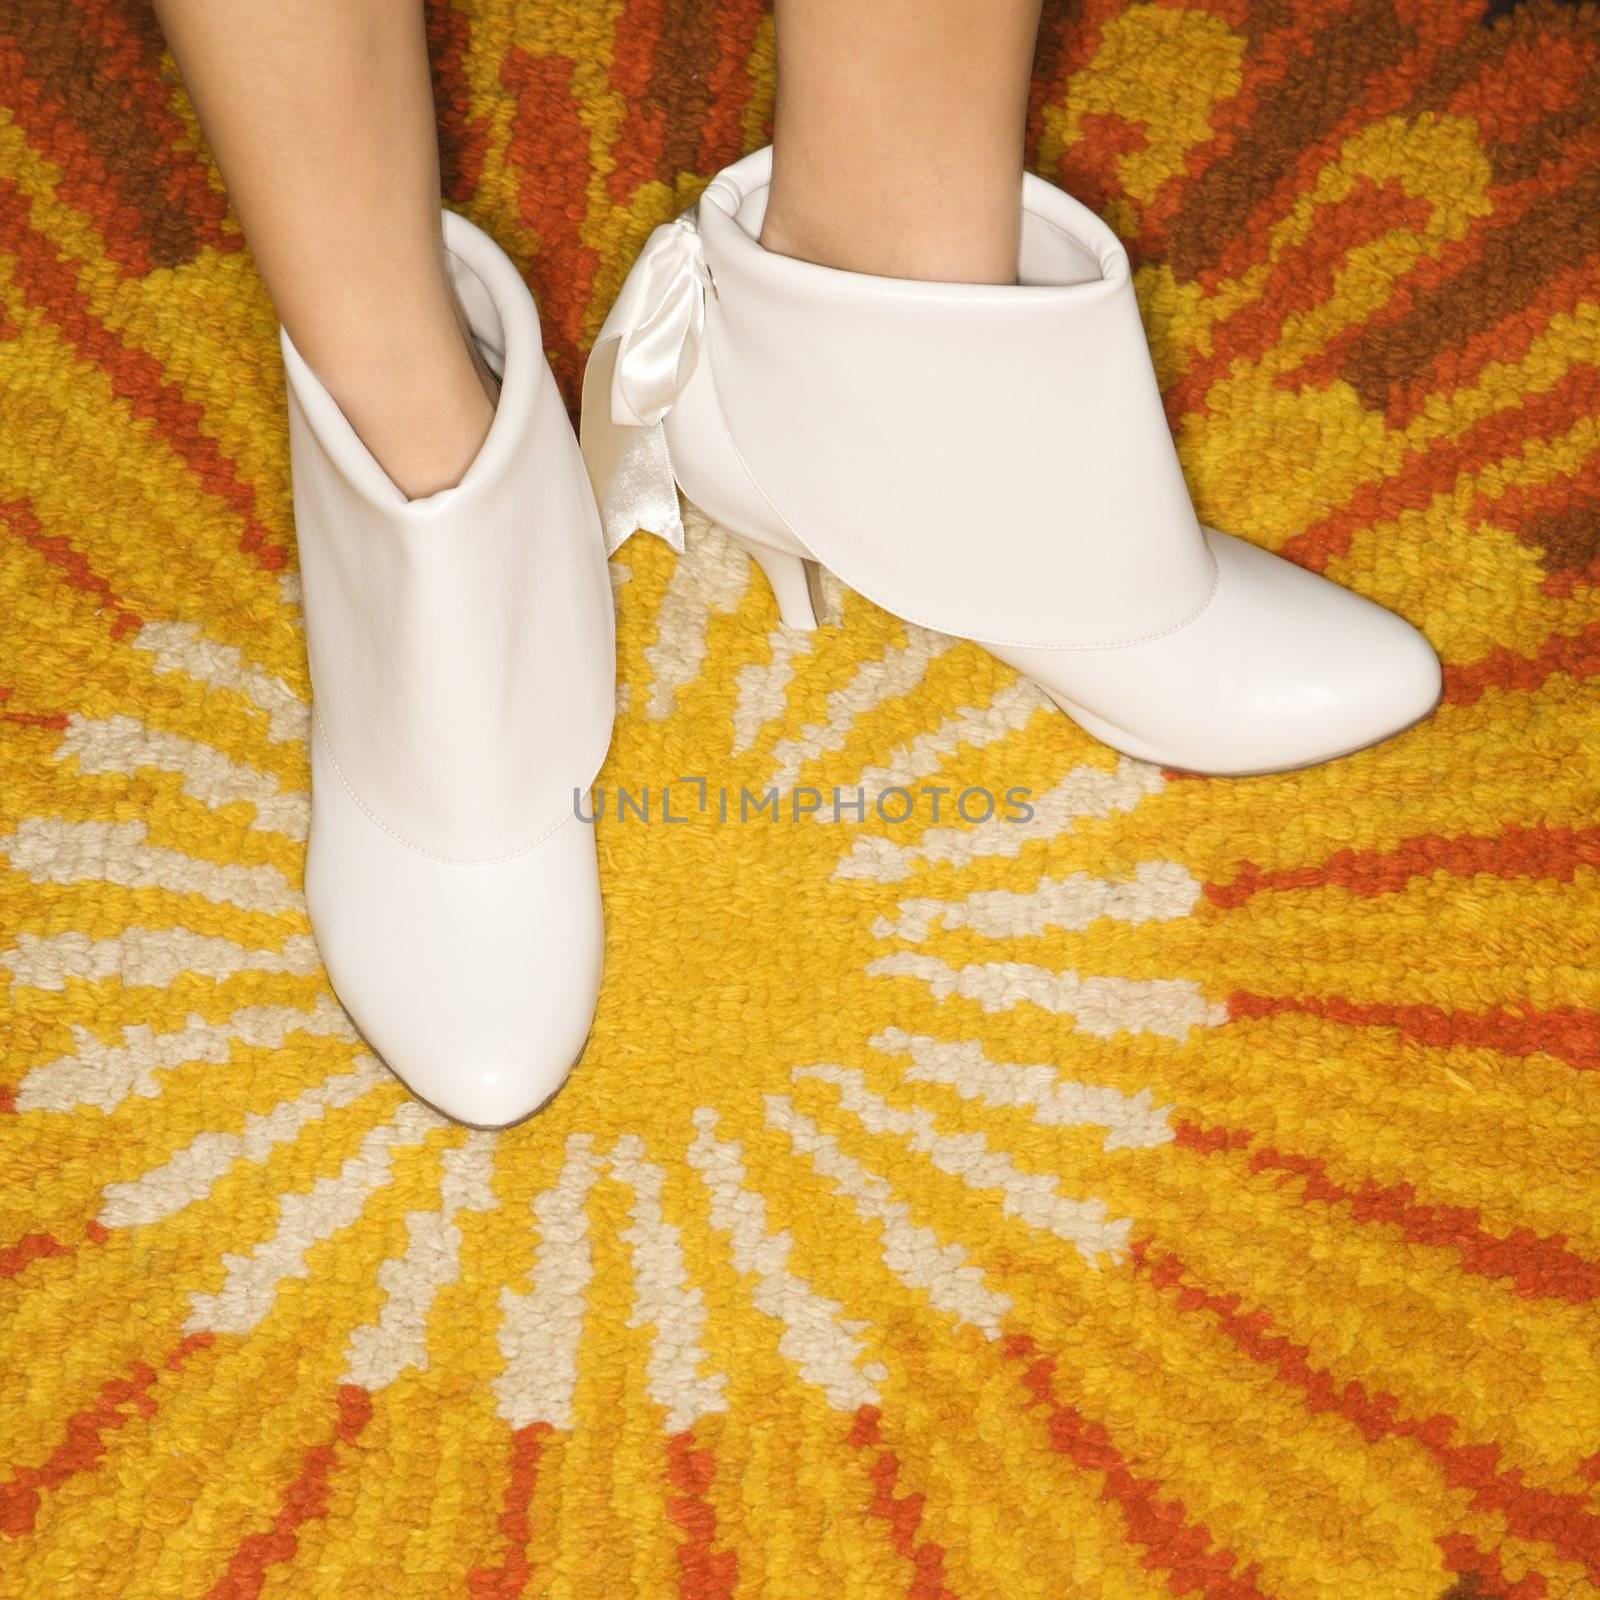 Close-up of Caucasian mid-adult female feet in white vintage boots against sunburst rug.